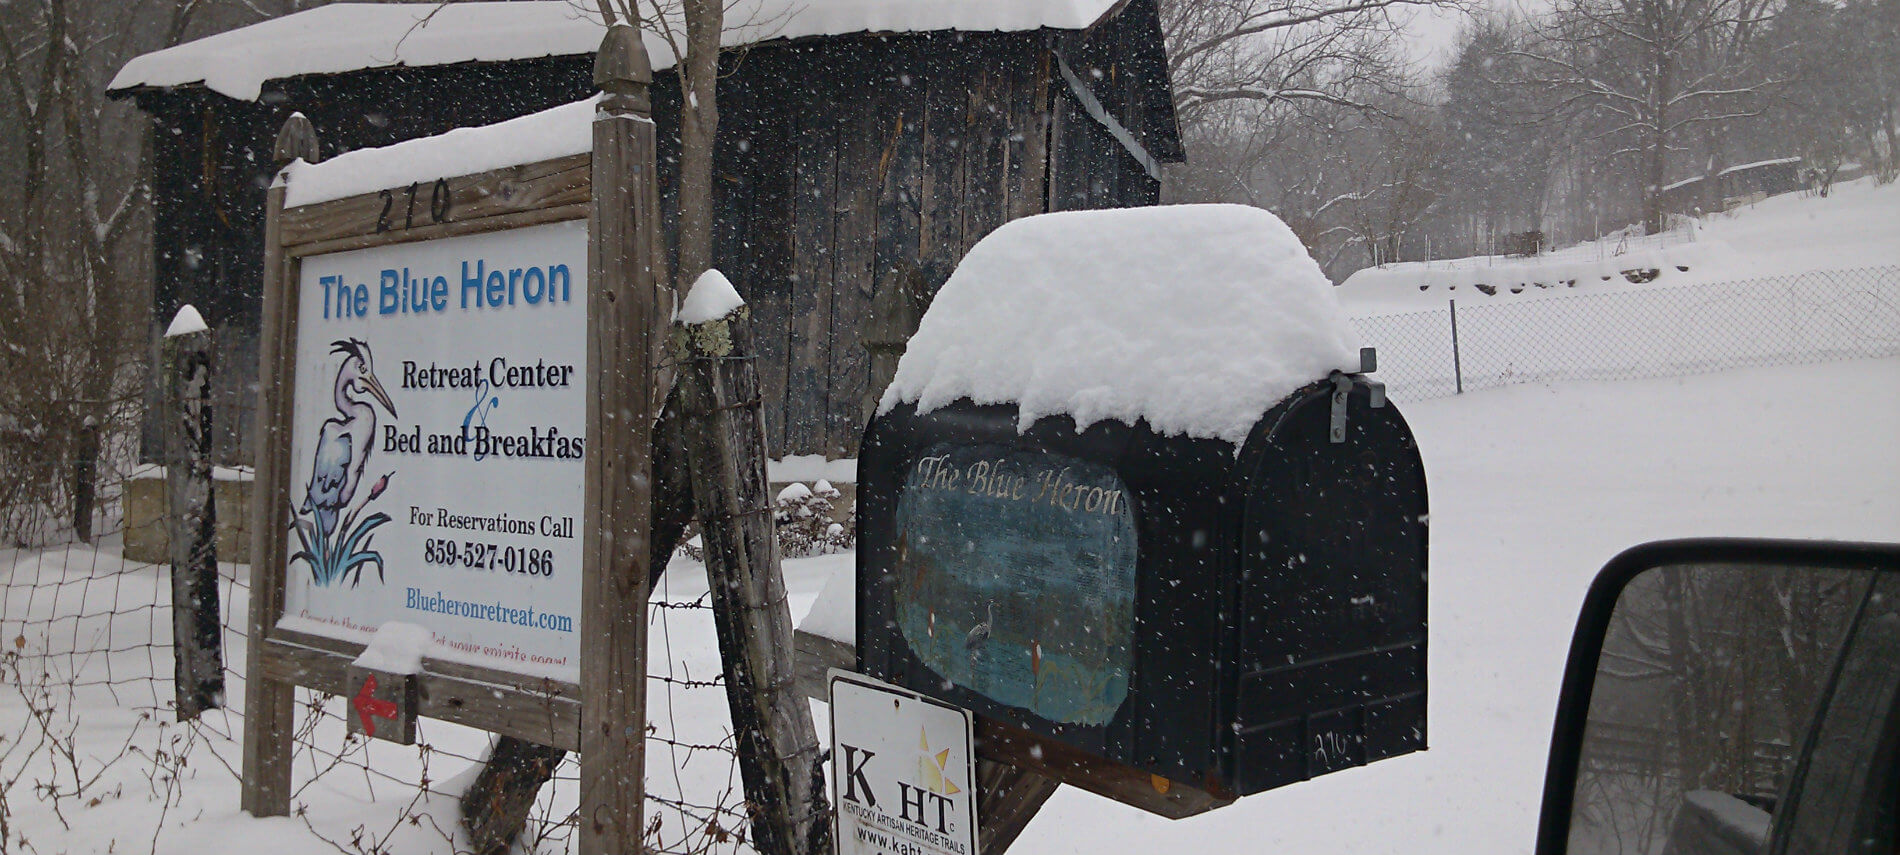 A large framed white sign with Blue Heron logo and painted mailbox welcome guests to the farm.